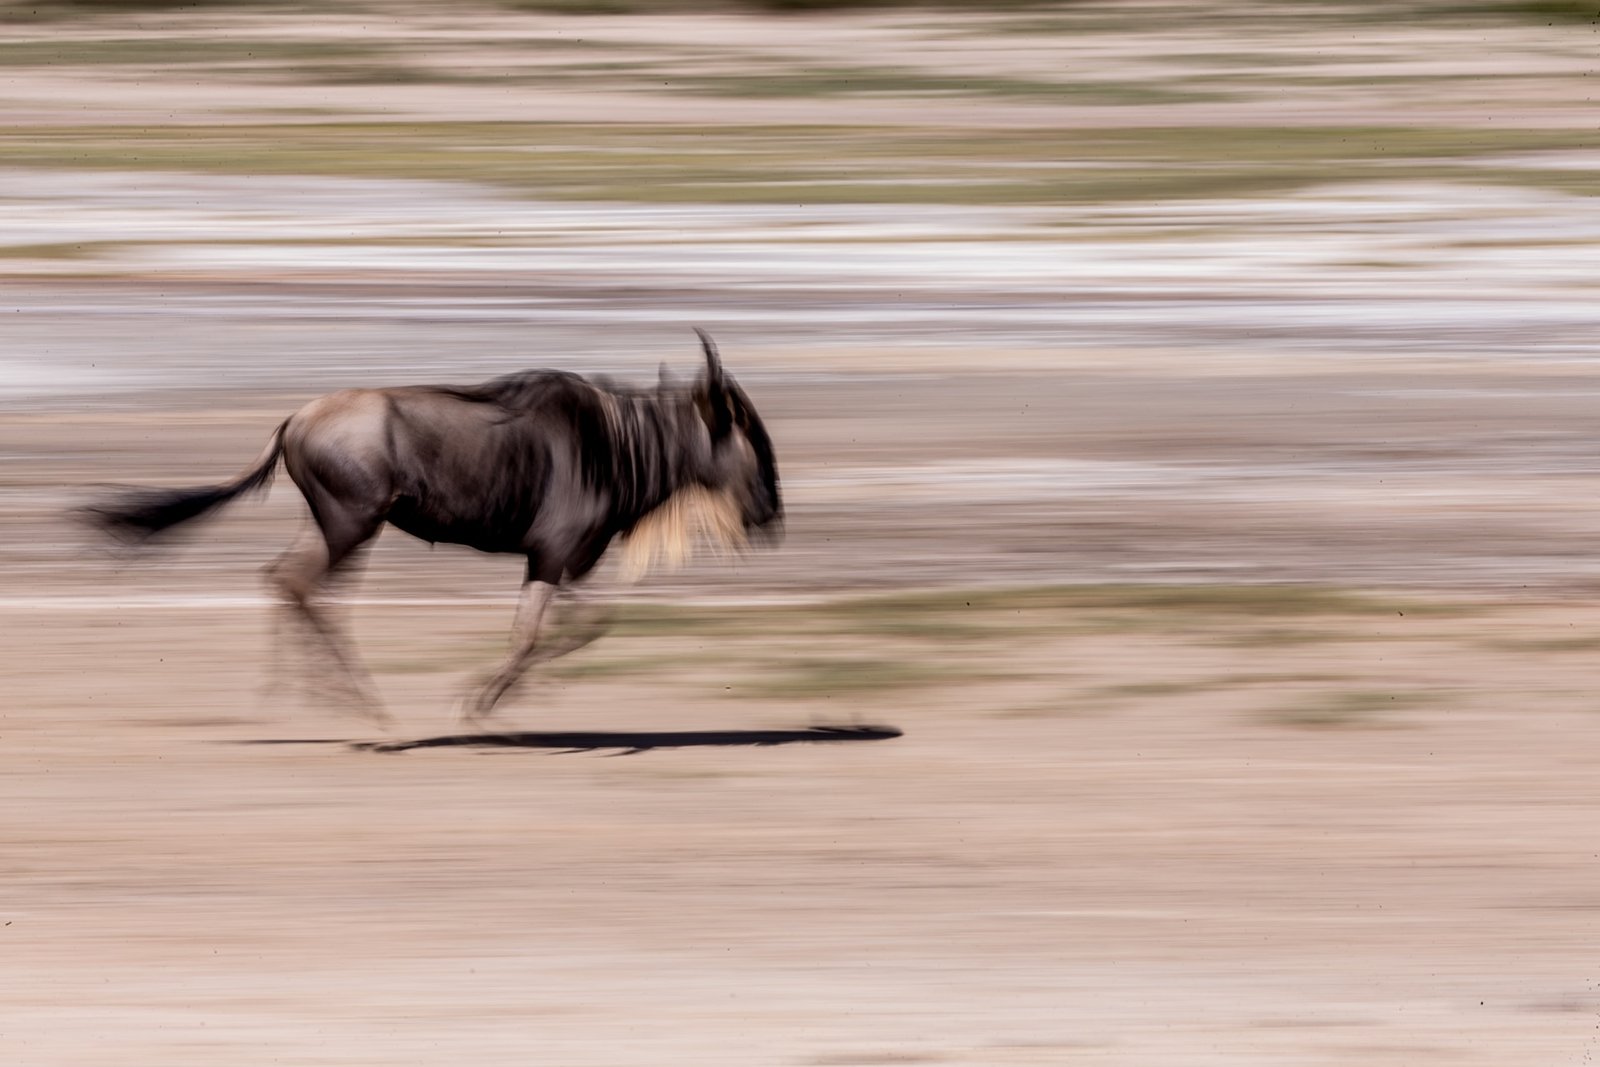 Wildbeest Migration River Crossing (6 Days)